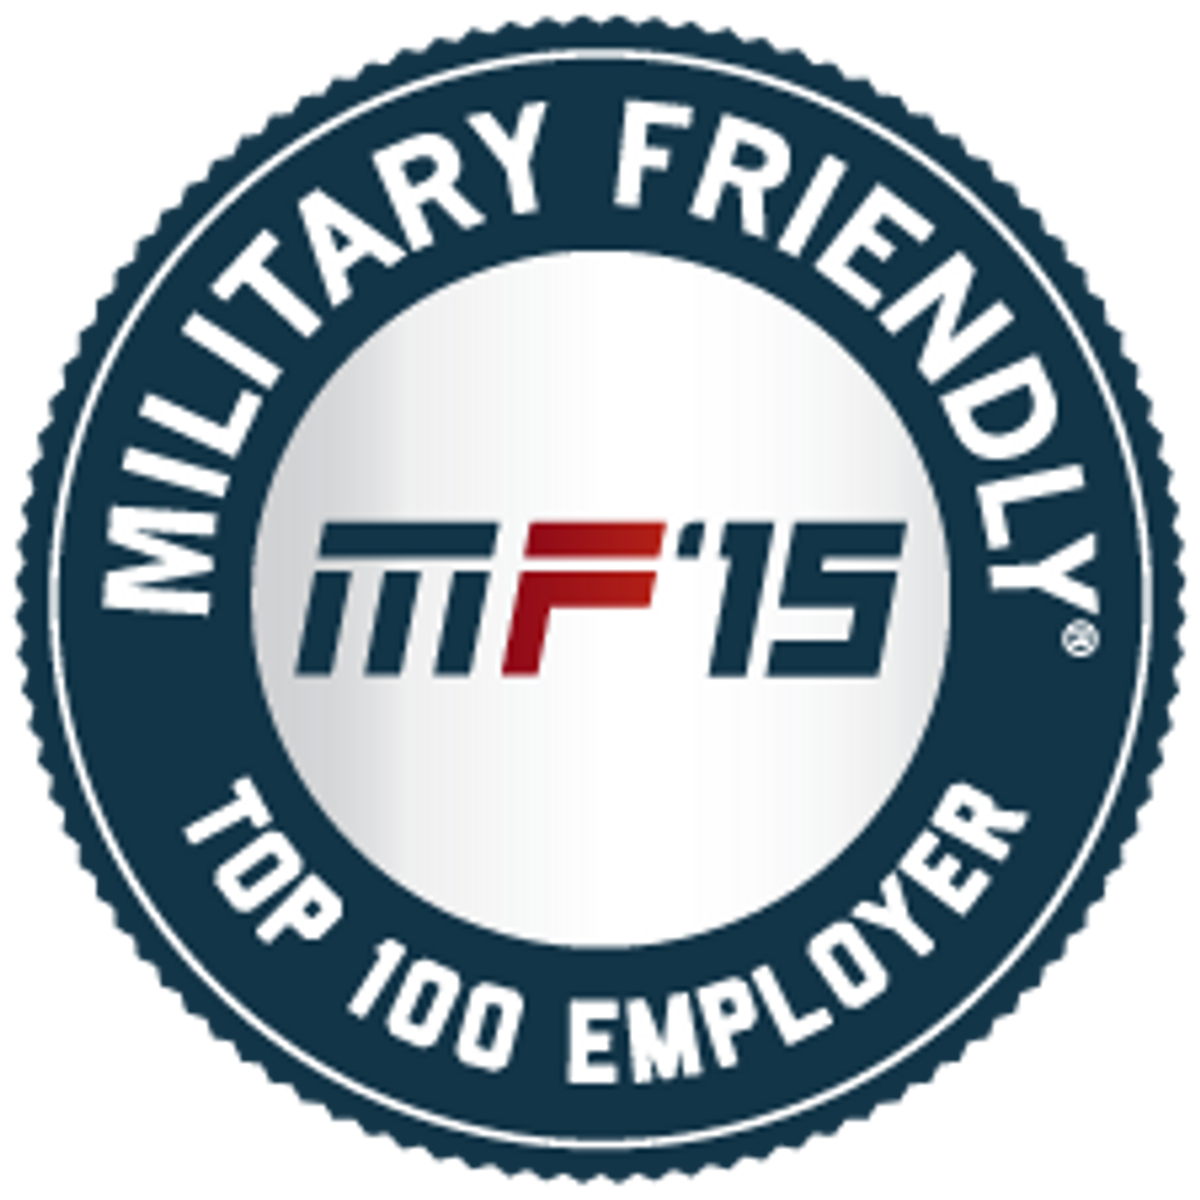 Penske Once Again a Top 100 Military-Friendly Employer